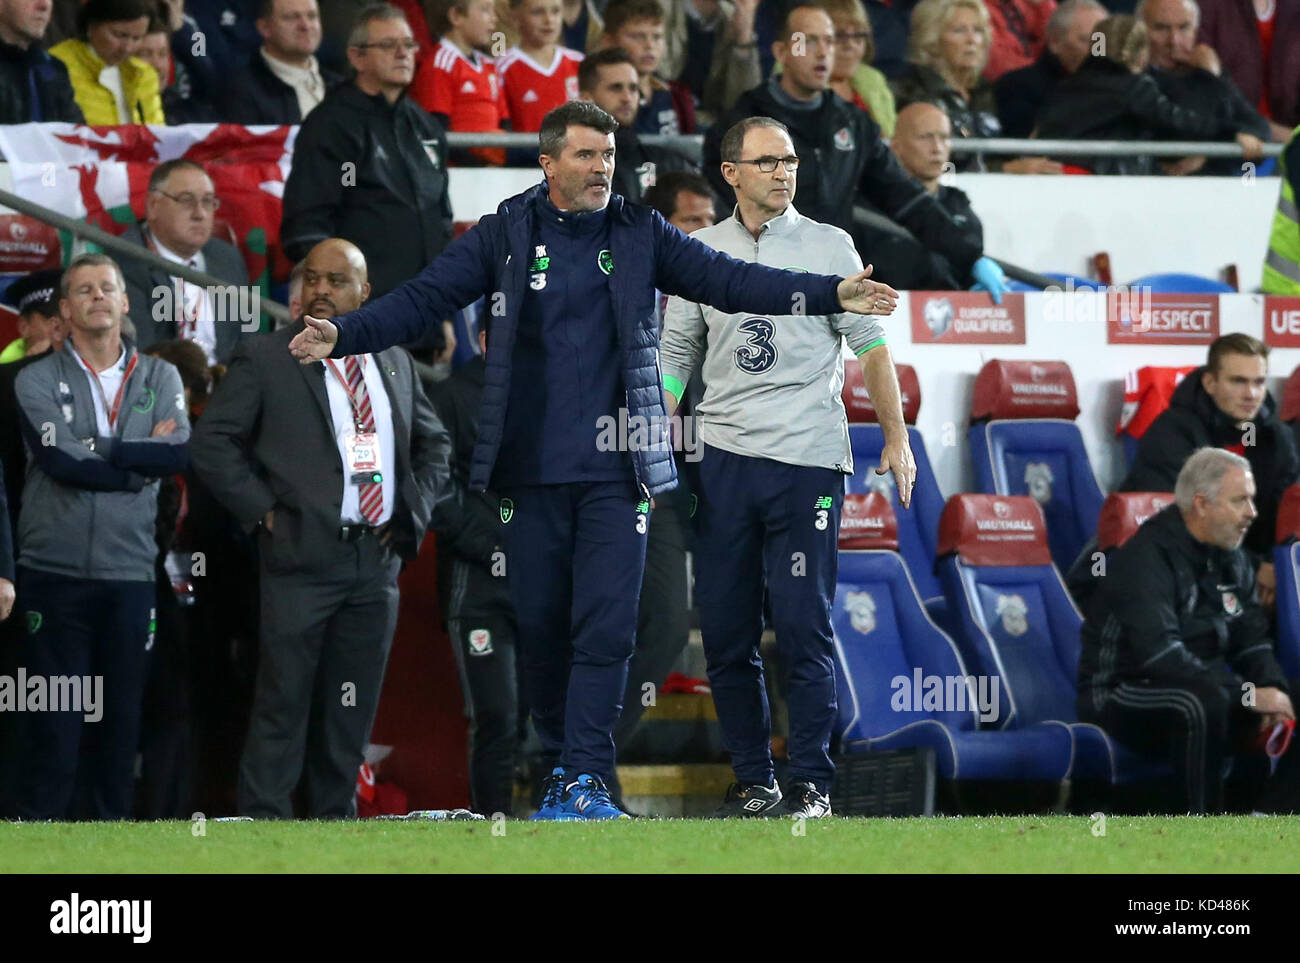 Republic of Ireland manager Martin O'Neill (right) and Assistant Manager Roy Keane gestures on the touchline during the 2018 FIFA World Cup Qualifying Group D match at the Cardiff City Stadium, Cardiff. PRESS ASSOCIATION Photo. Picture date: Monday October 9, 2017. See PA story SOCCER Wales. Photo credit should read: Nigel French/PA Wire. RESTRICTIONS: Editorial use only, No commercial use without prior permission. Stock Photo